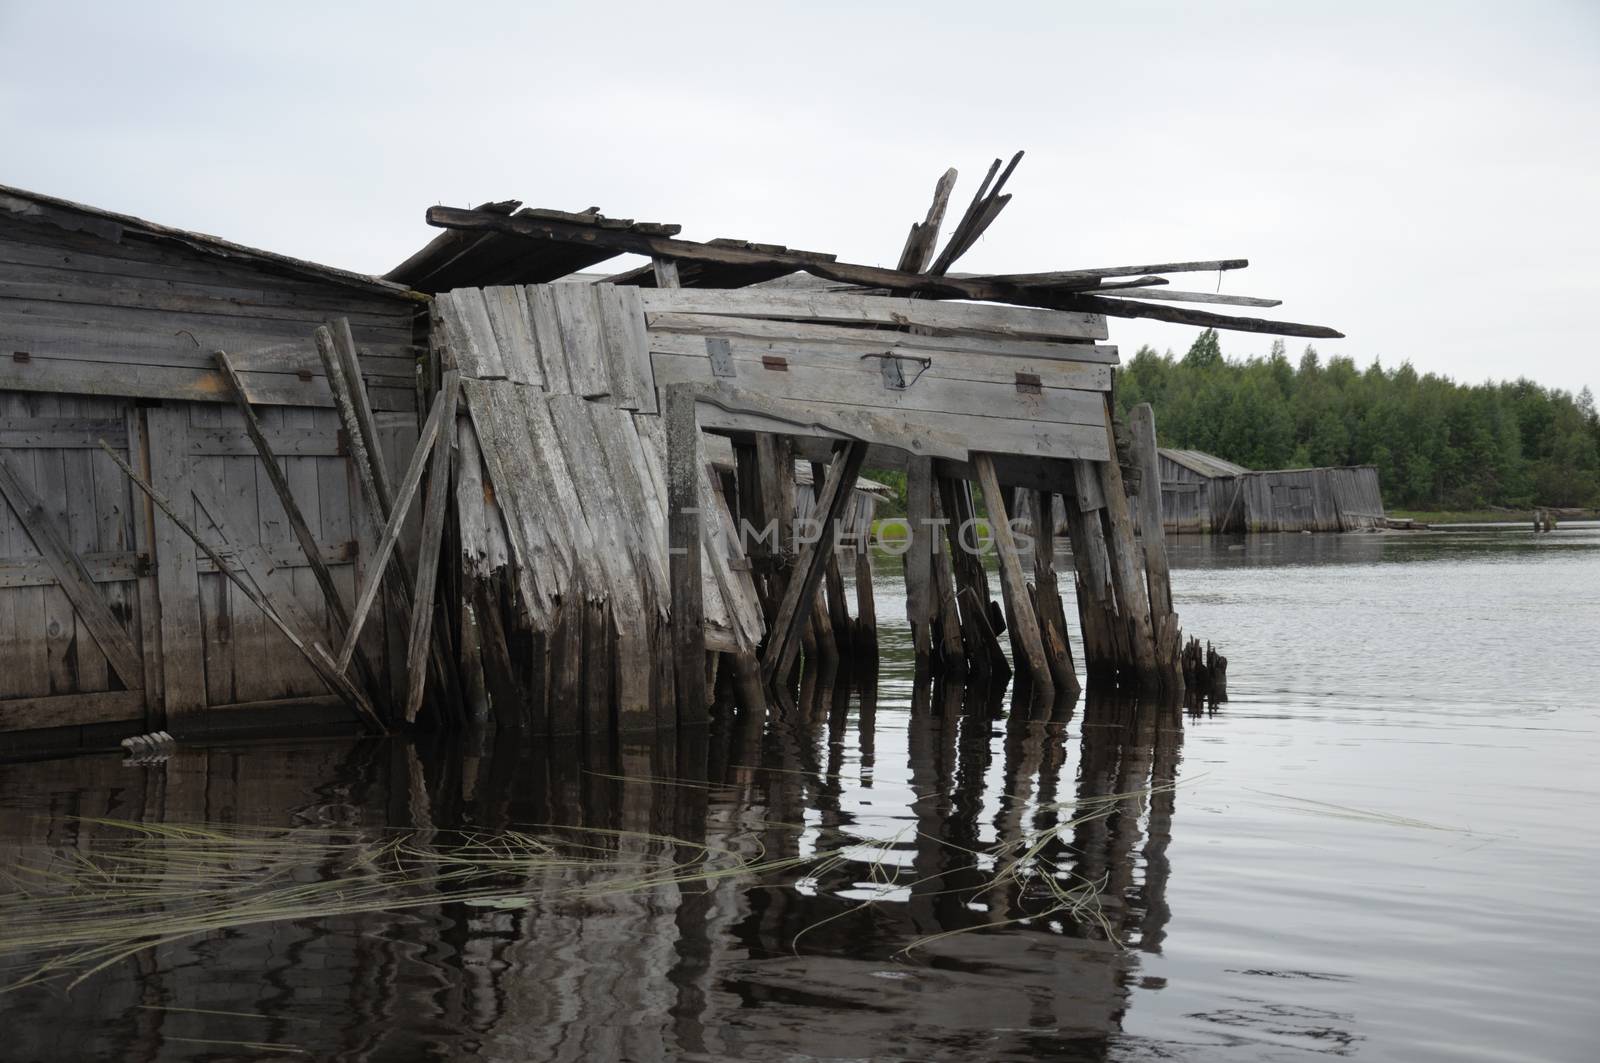 The picture shows abandoned and broken slip docs in a small settlement in Russia's Karelia region